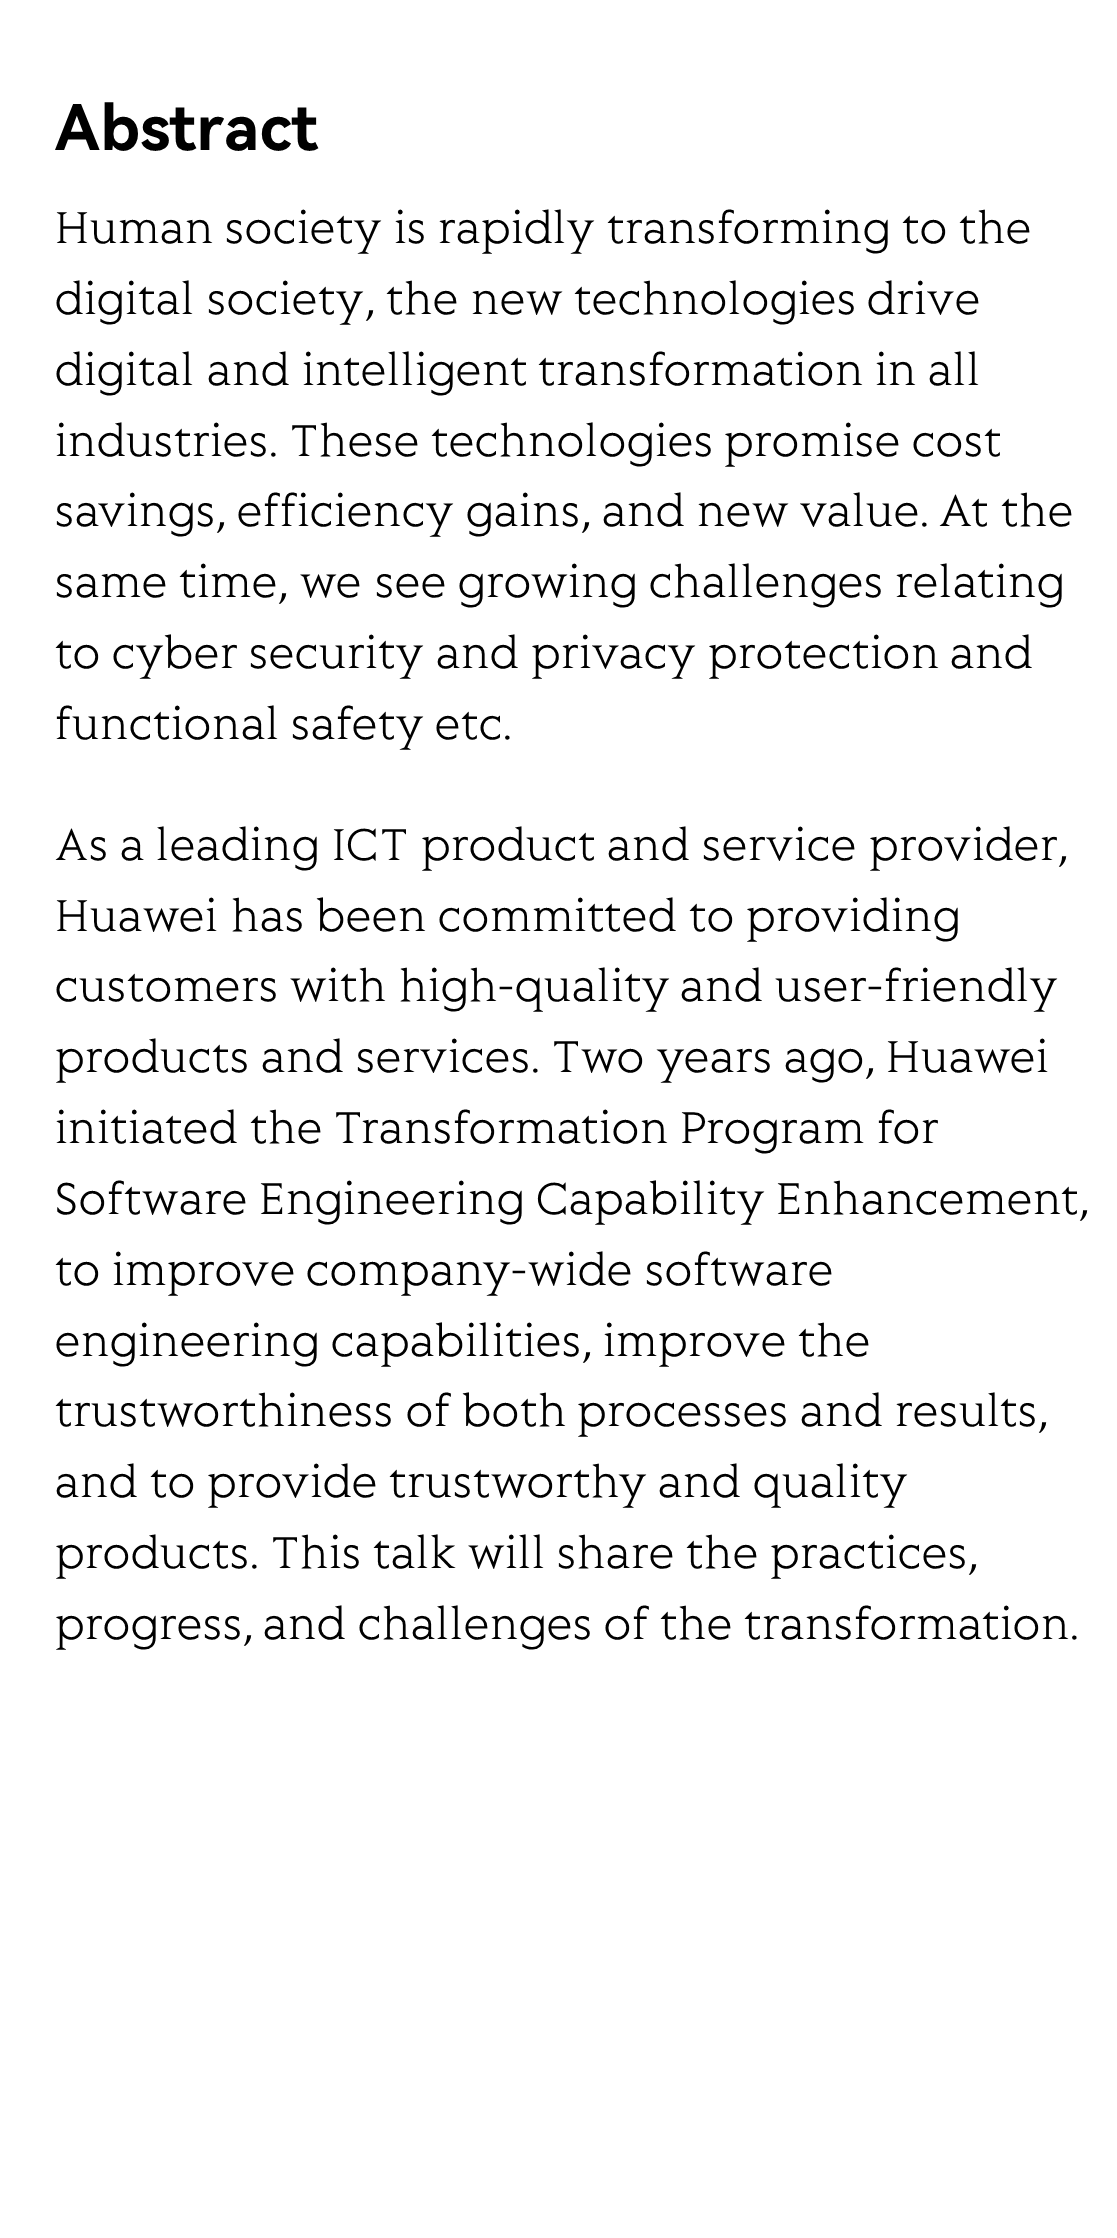 Huawei's practices on trusted software engineering capability improvement (invited talk)_2